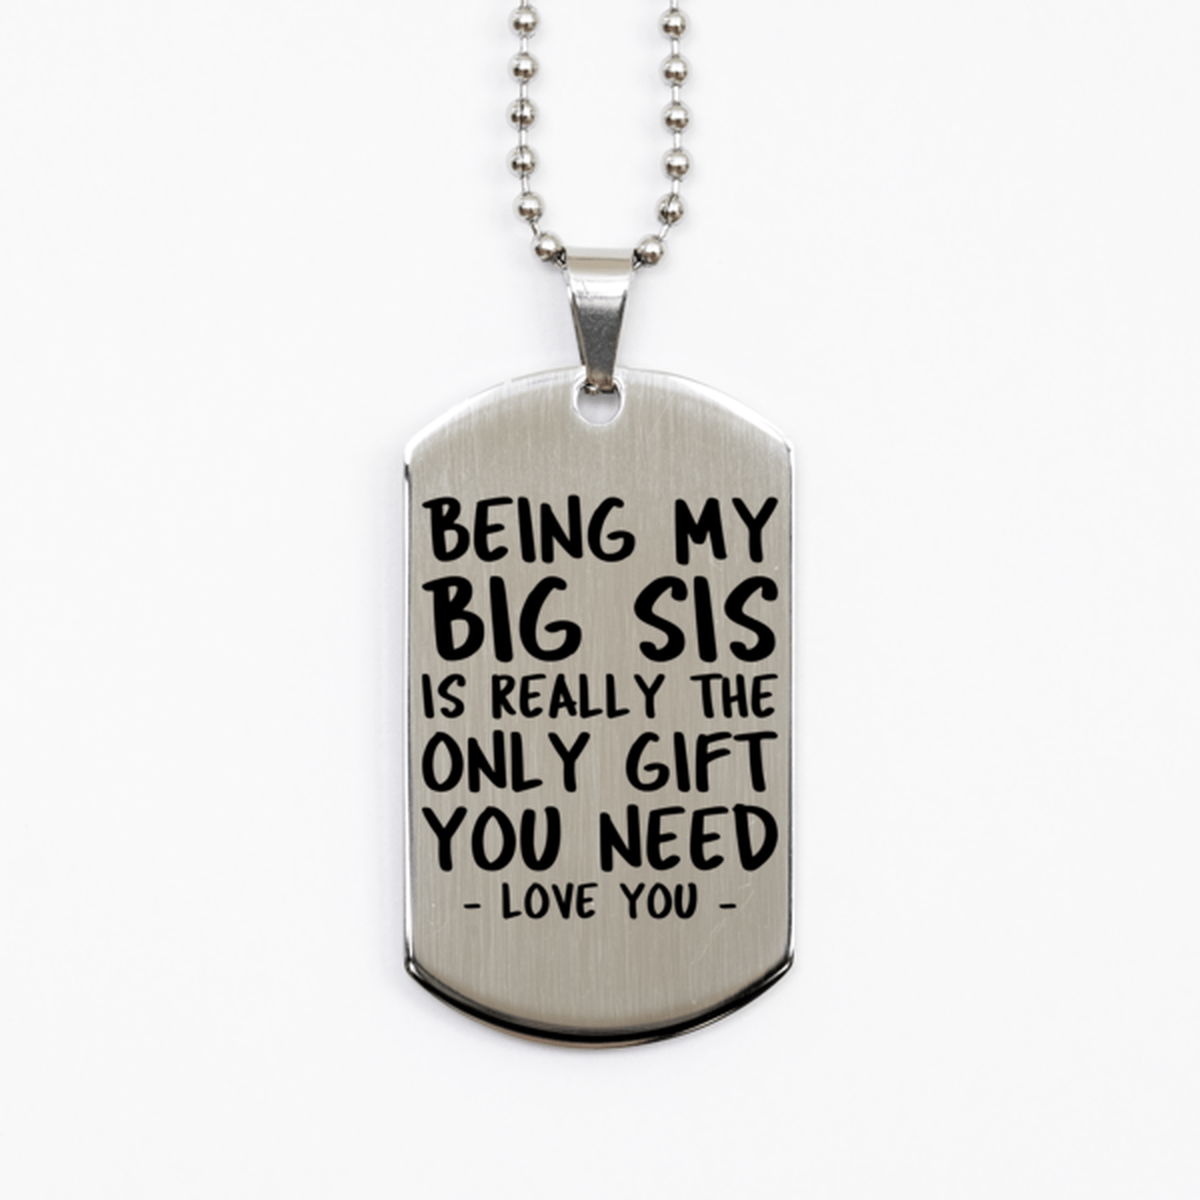 Funny Big Sis Silver Dog Tag Necklace, Being My Big Sis Is Really the Only Gift You Need, Best Birthday Gifts for Big Sis